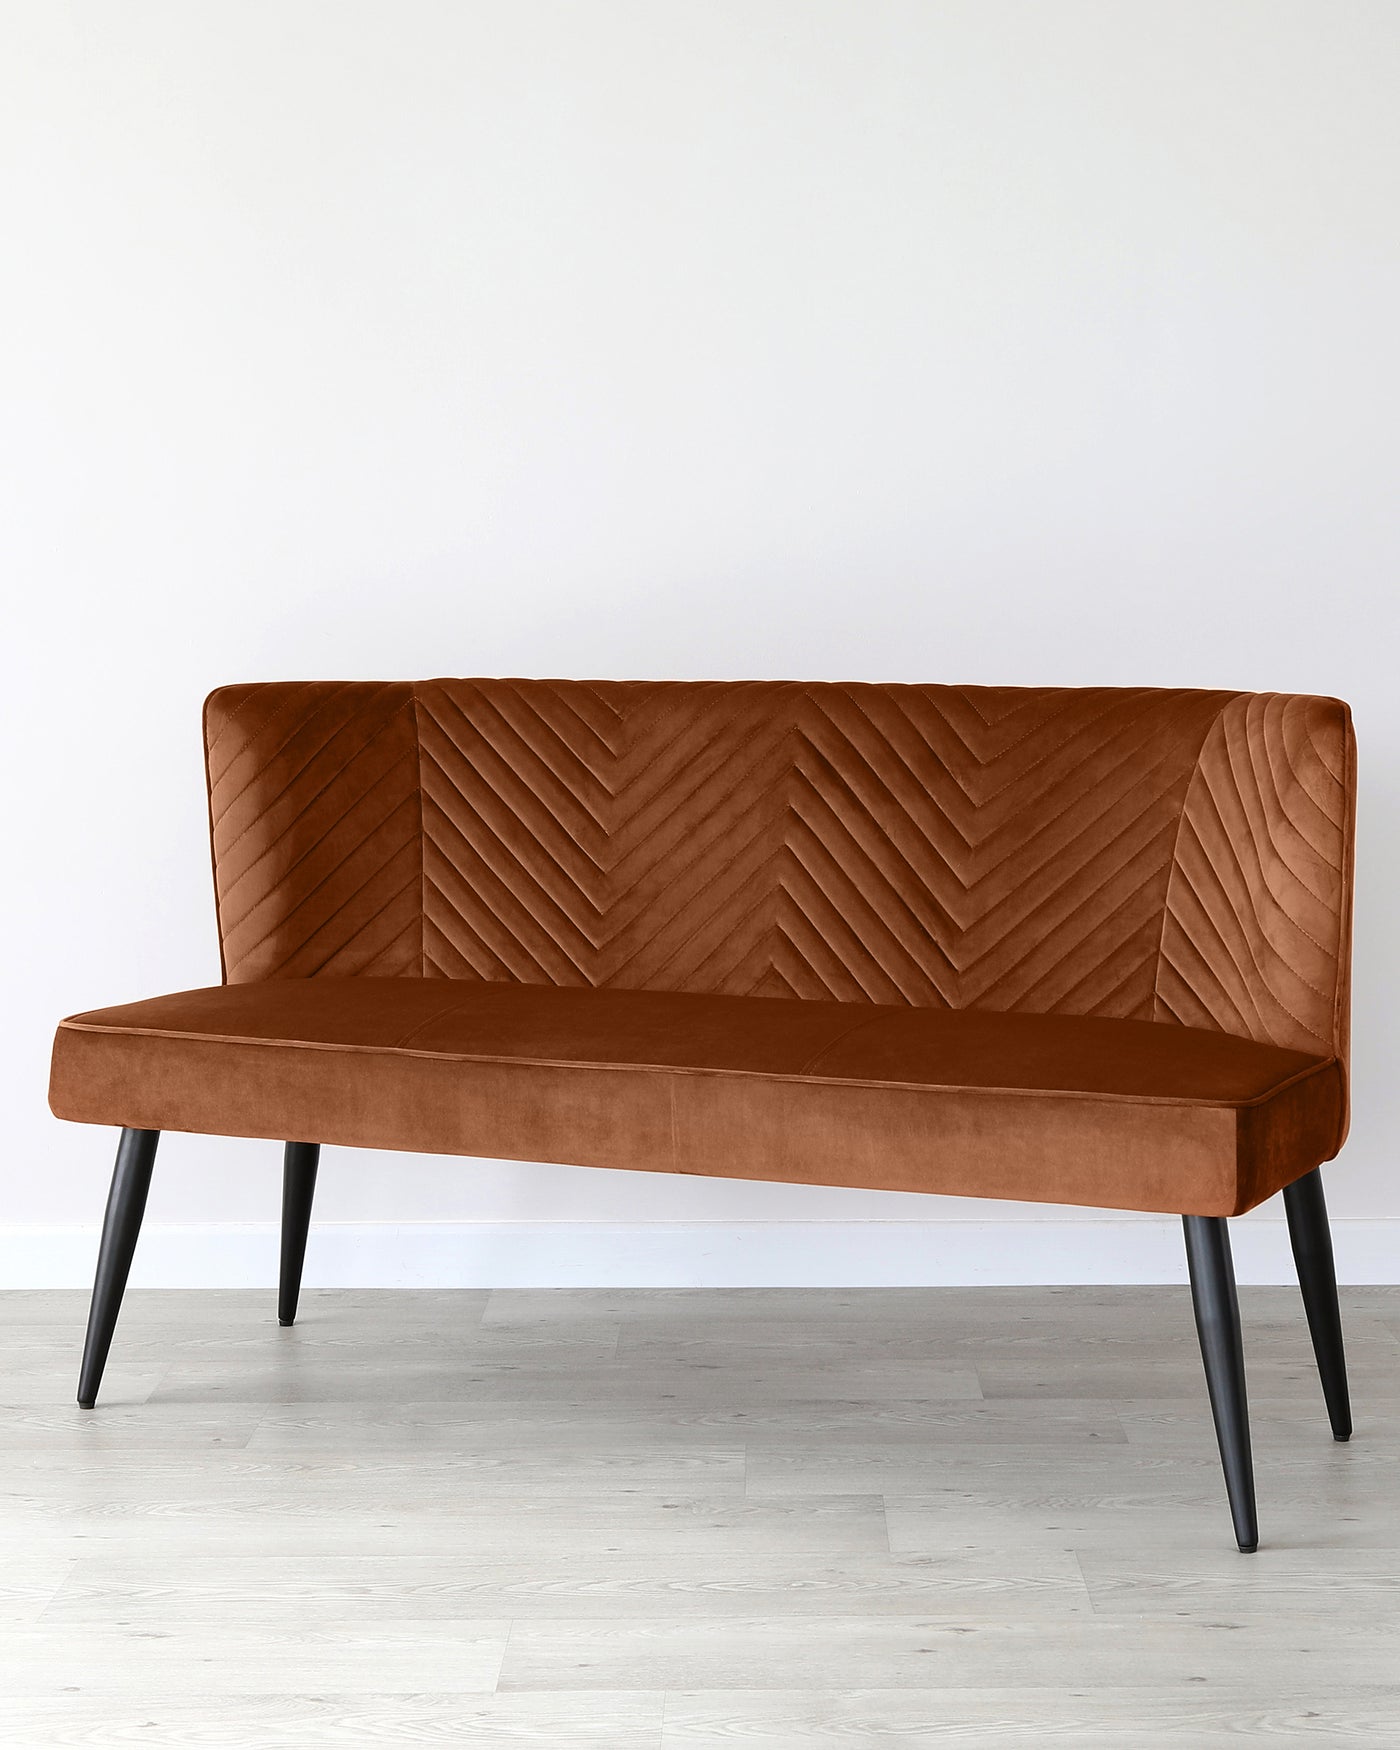 Modern mid-century style bench with a high backrest and chevron pattern upholstery in a warm caramel tone, supported by sleek tapered black legs, set against a clean white wall on a light wood floor.